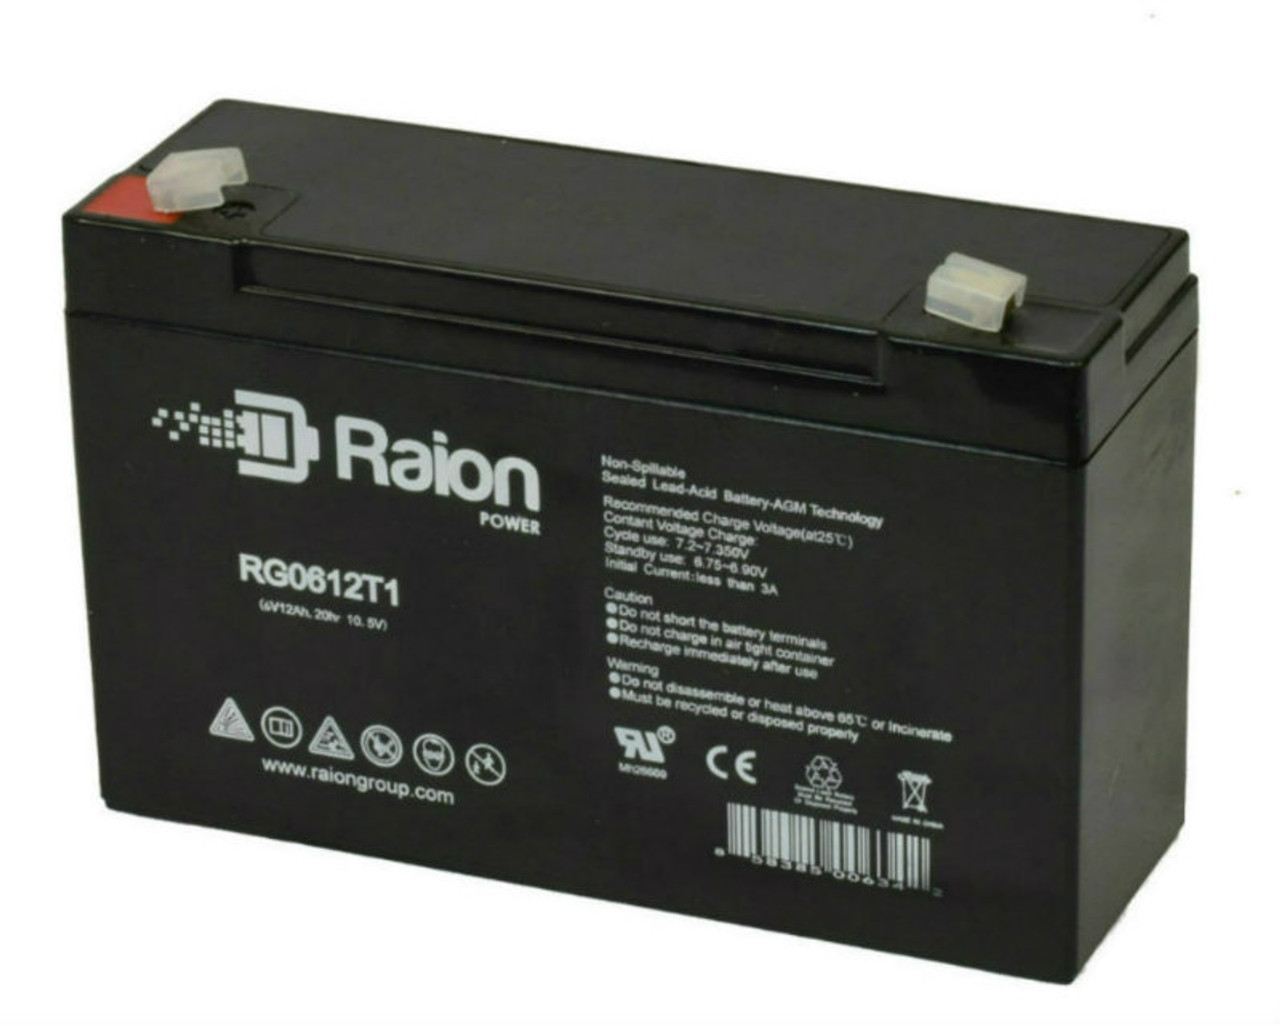 Raion Power RG06120T1 Replacement Emergency Light Battery for Dynalife S18169